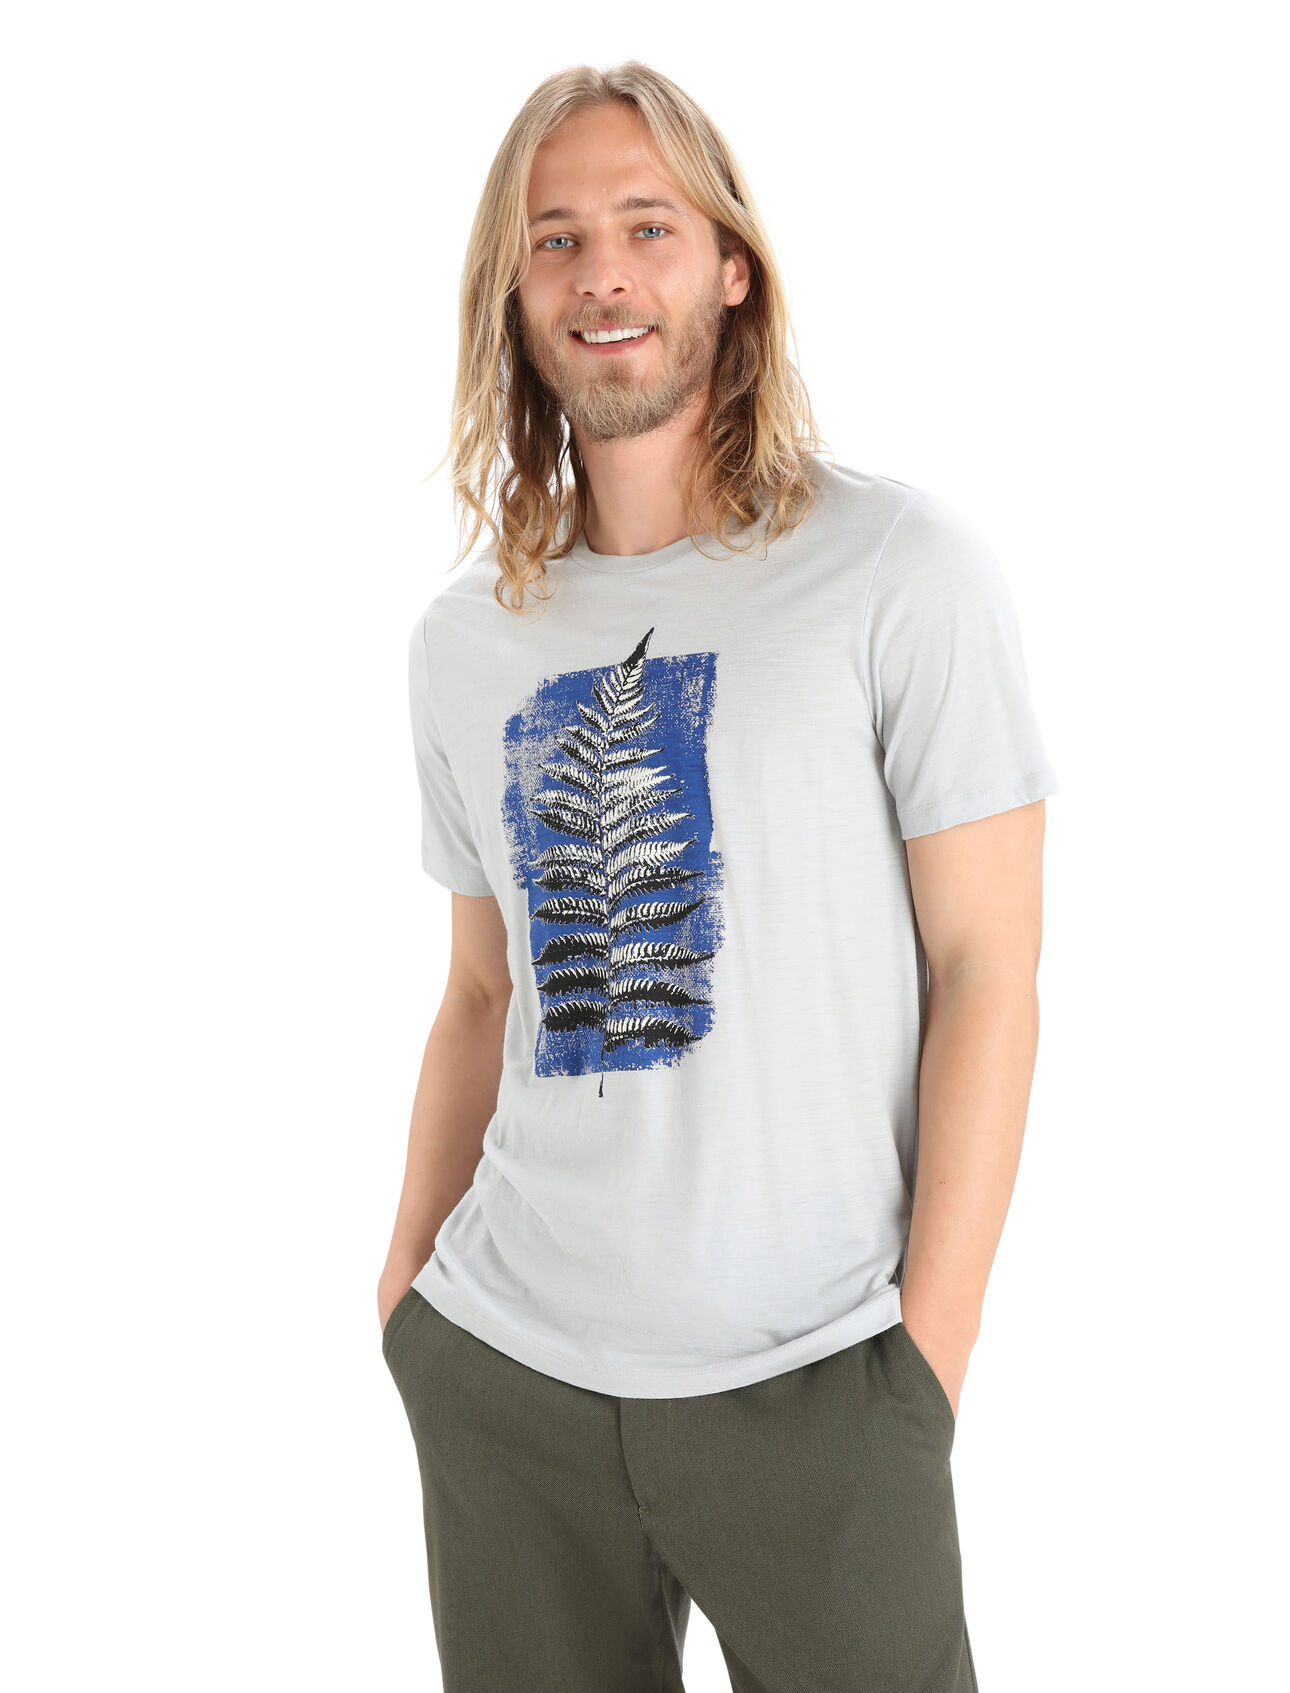 Mens Merino Tech Lite II Short Sleeve T-Shirt Fern Imprint Our versatile tech tee that provides comfort, breathability and natural odor-resistance for any adventure you can think of, the Tech Lite II Short Sleeve Tee Fern Imprint features 100% merino for all-natural performance. The tee’s original artwork features a screenprint of the Ponga, or silver fern, a tree fern that only grows in New Zealand.